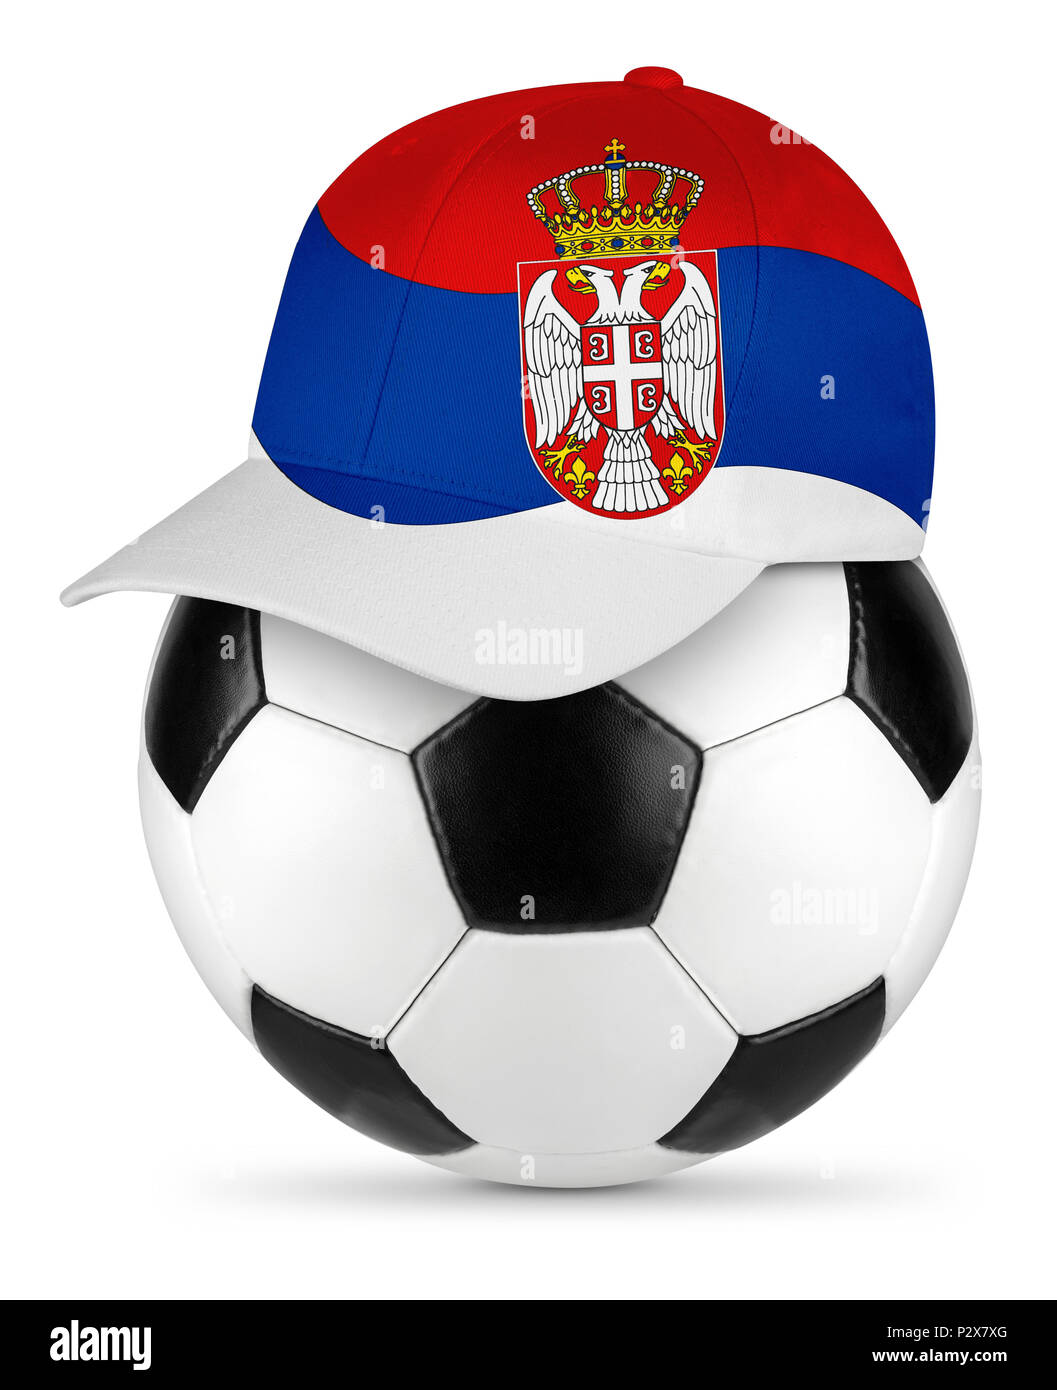 Classic black white leather soccer ball serbia serbian flag baseball fan cap isolated background sport football concept Stock Photo